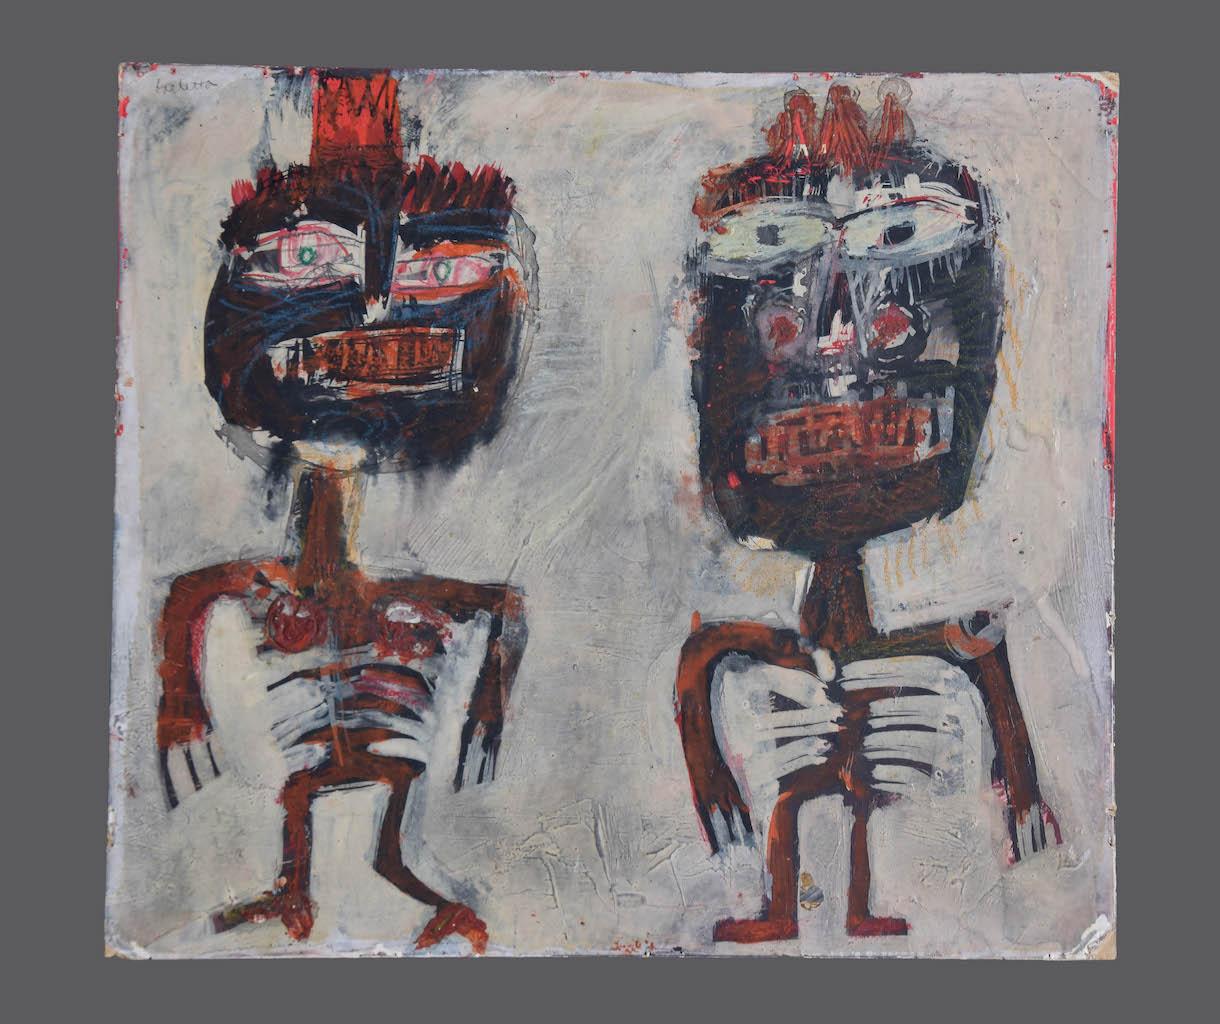 Figures is an original painting in oil and tempera on hard cardboard, realized by Sergio Barletta in 1960.

Hand-signed at the top-left.

In good conditions.

The artwork represents two figures through expressionistic style by confident and quick